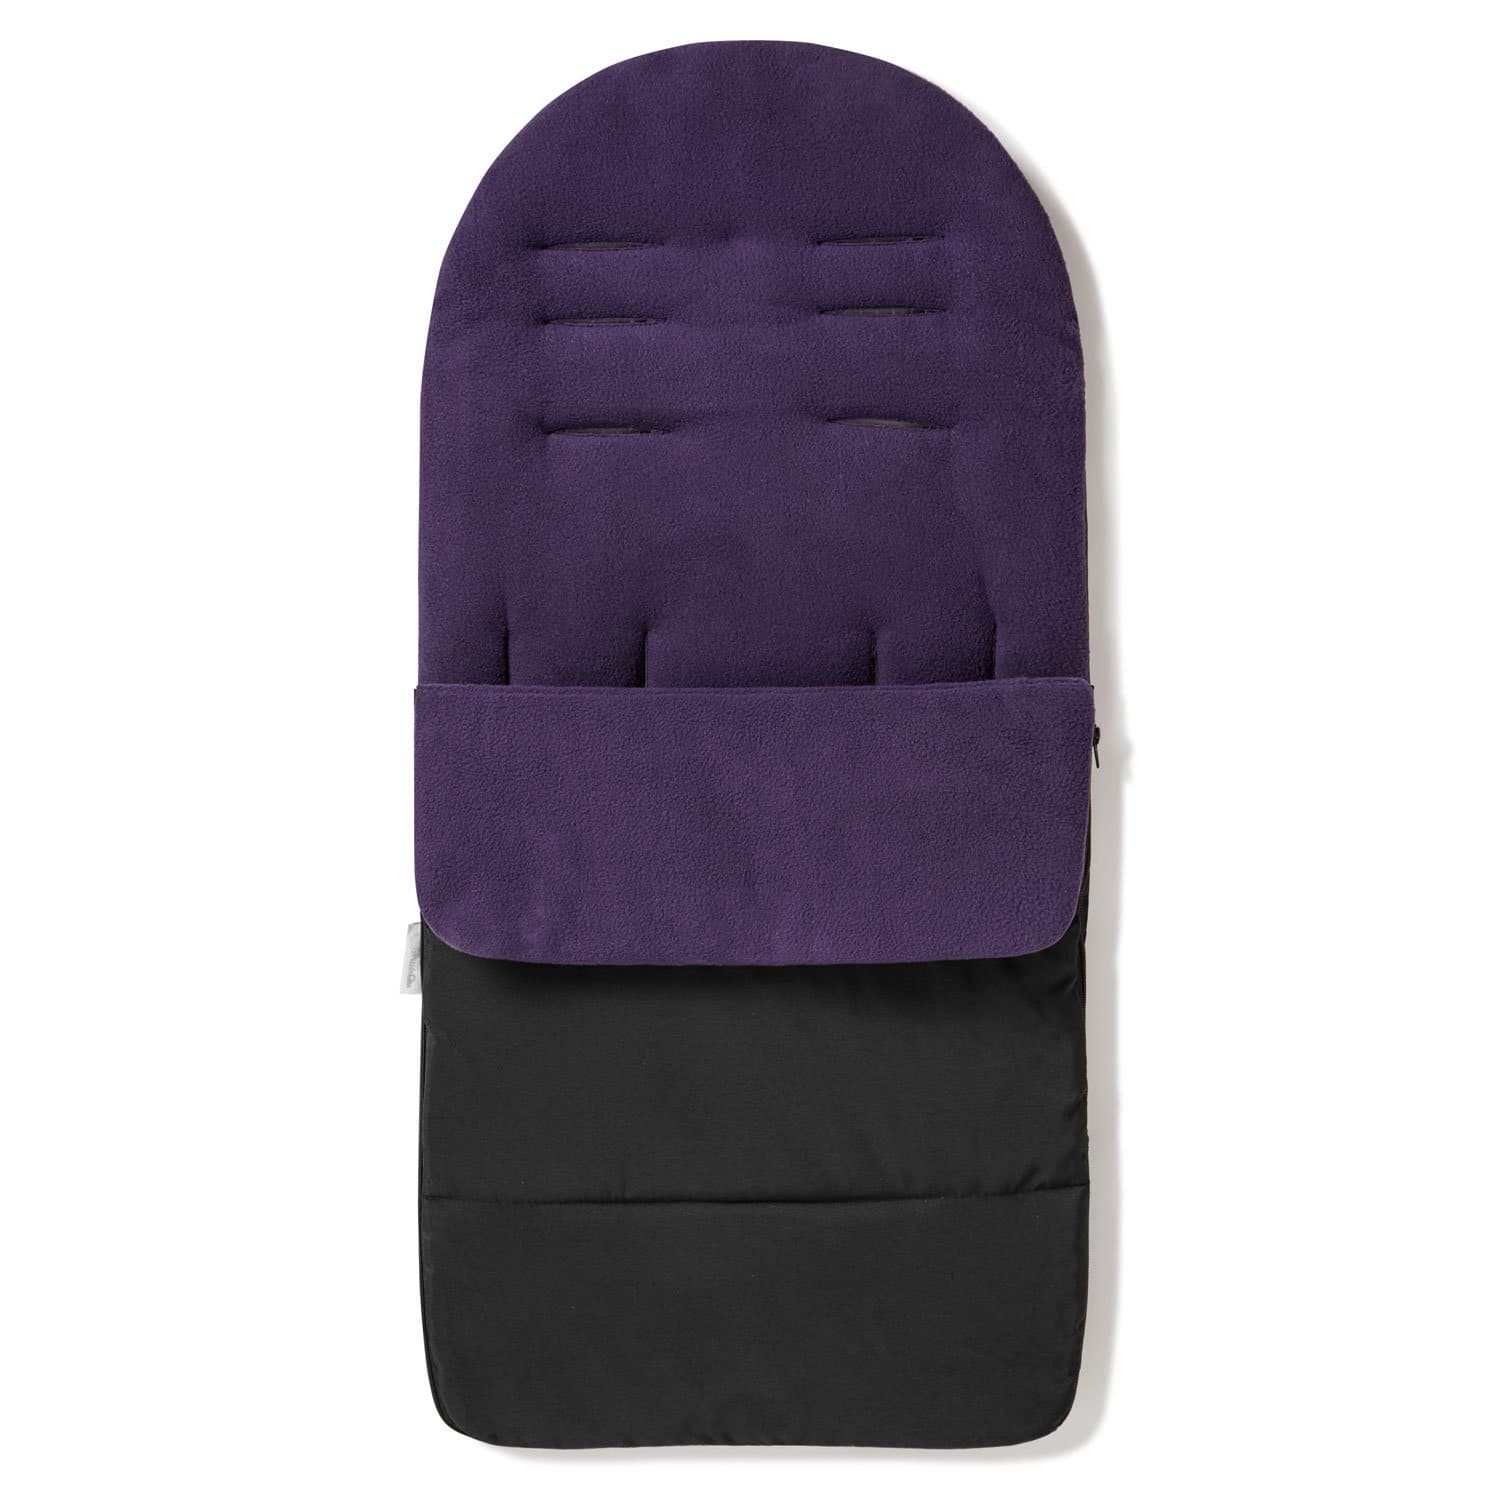 Premium Footmuff / Cosy Toes Compatible with Mountain Buggy - Plum Purple / Fits All Models | For Your Little One